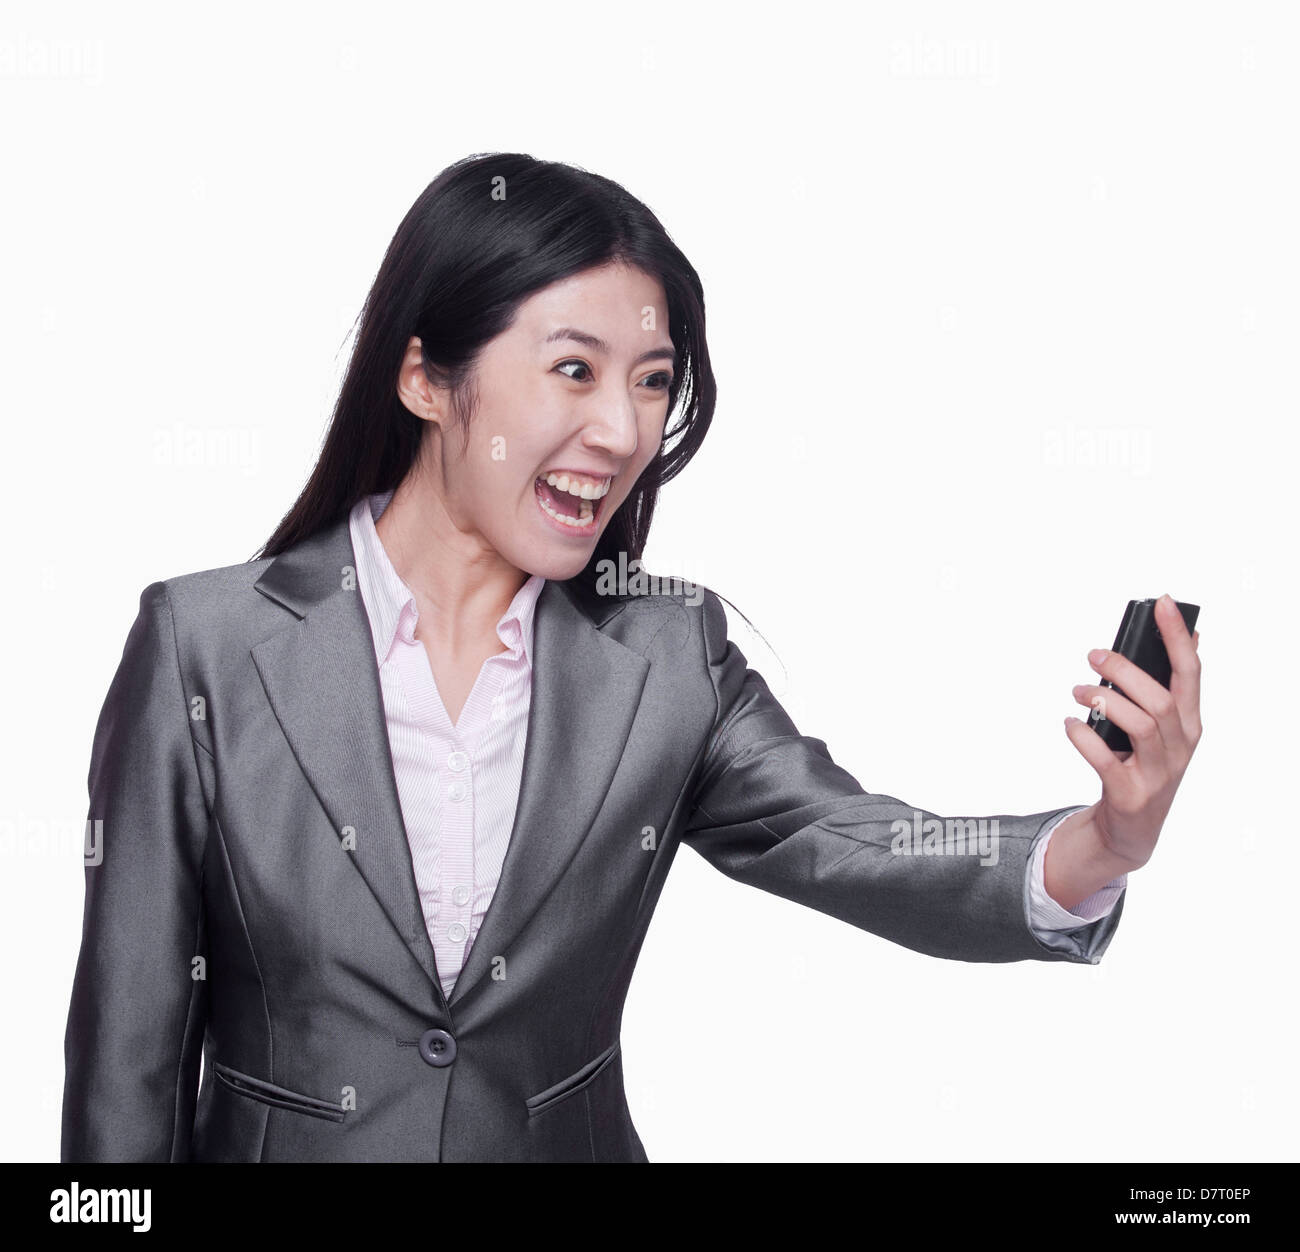 Businesswoman yelling at mobile phone Stock Photo